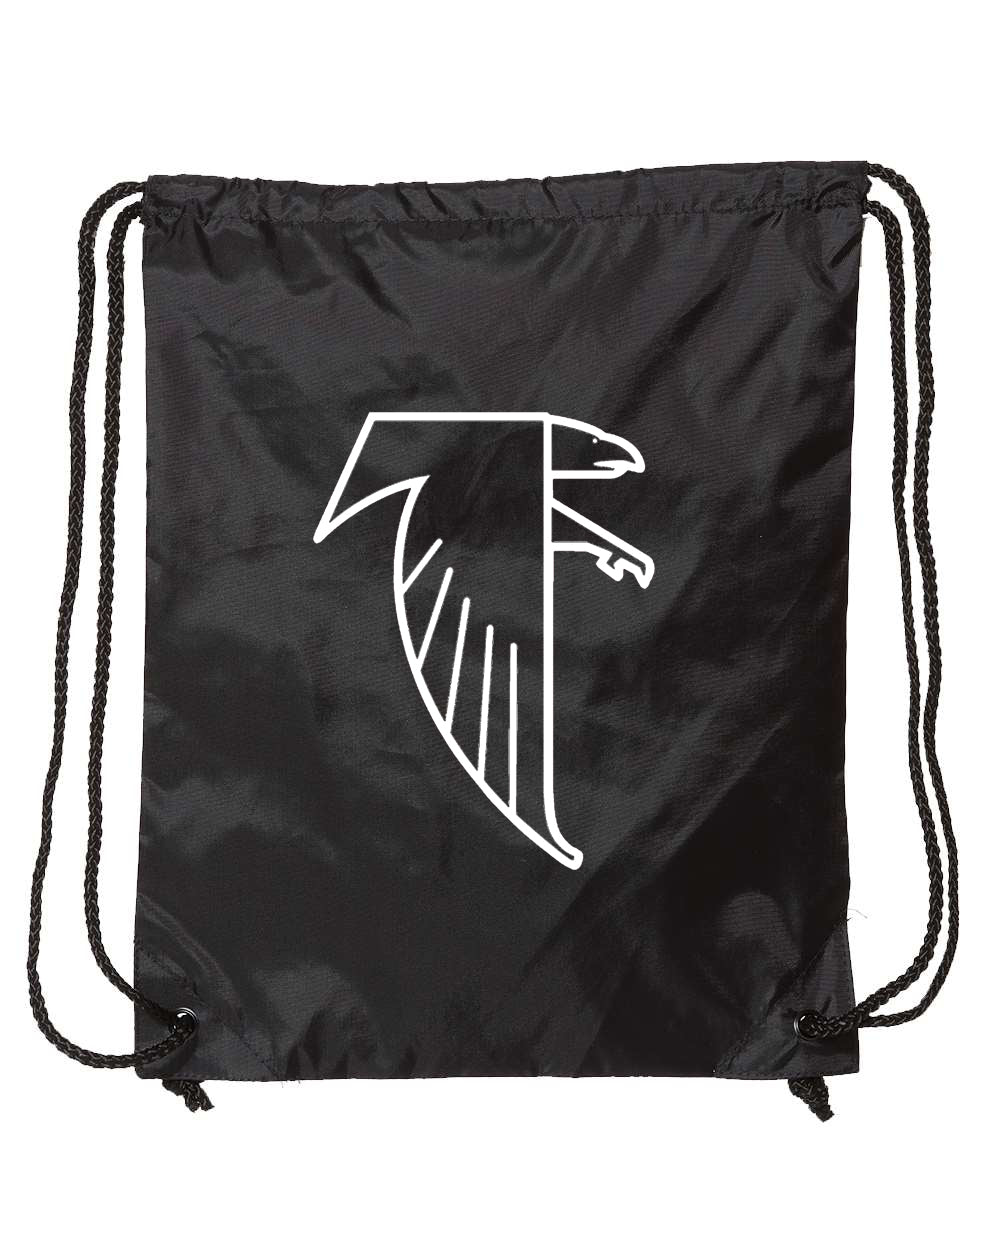 Firelands Falcons 14x18 Drawstring Tote - Mistakes on the Lake